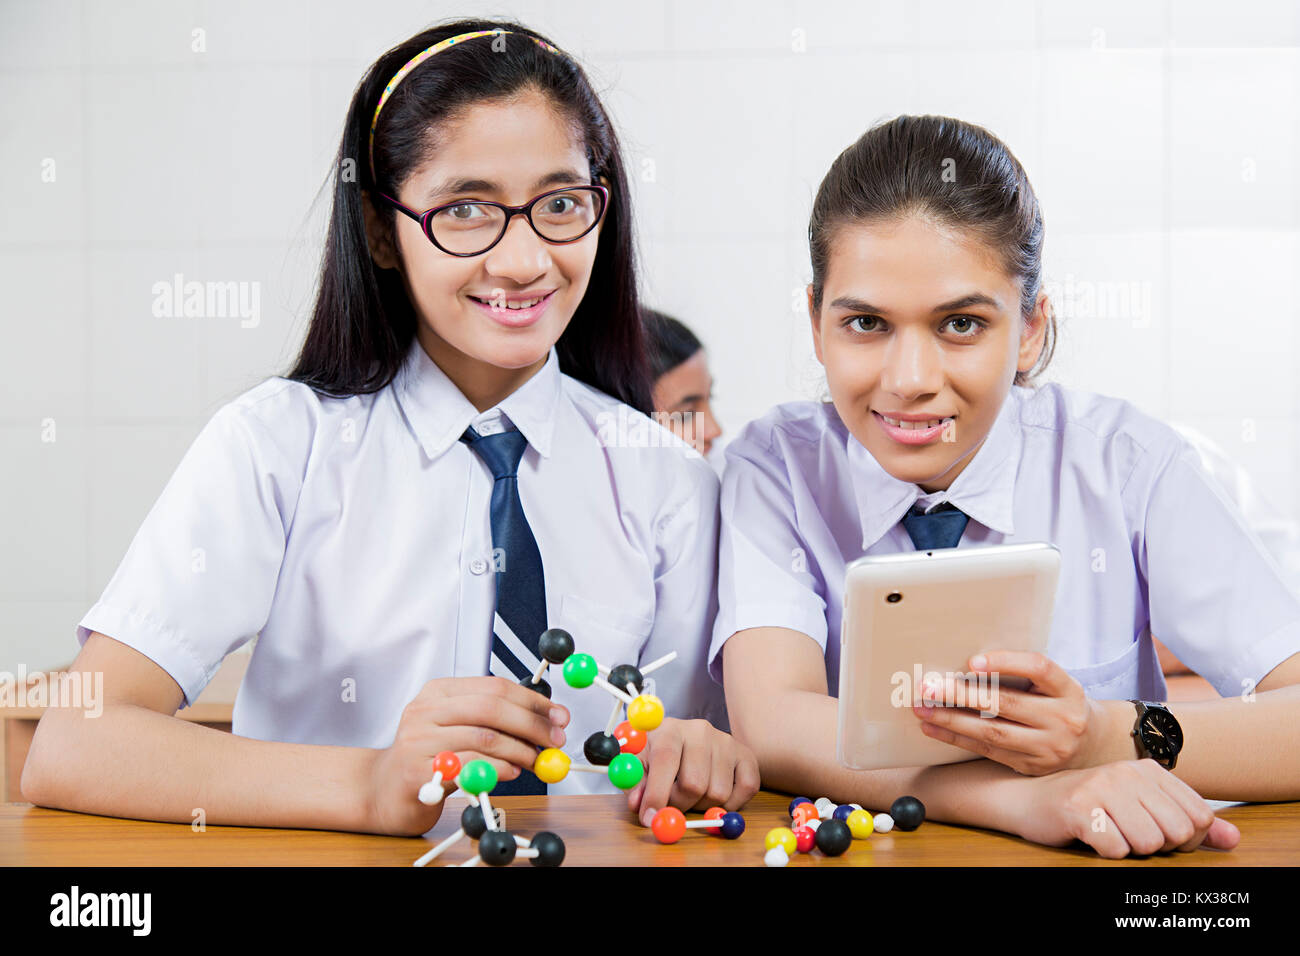 2 School Teenagers Girls Students Molecule With Tablet Phone Studying Stock Photo